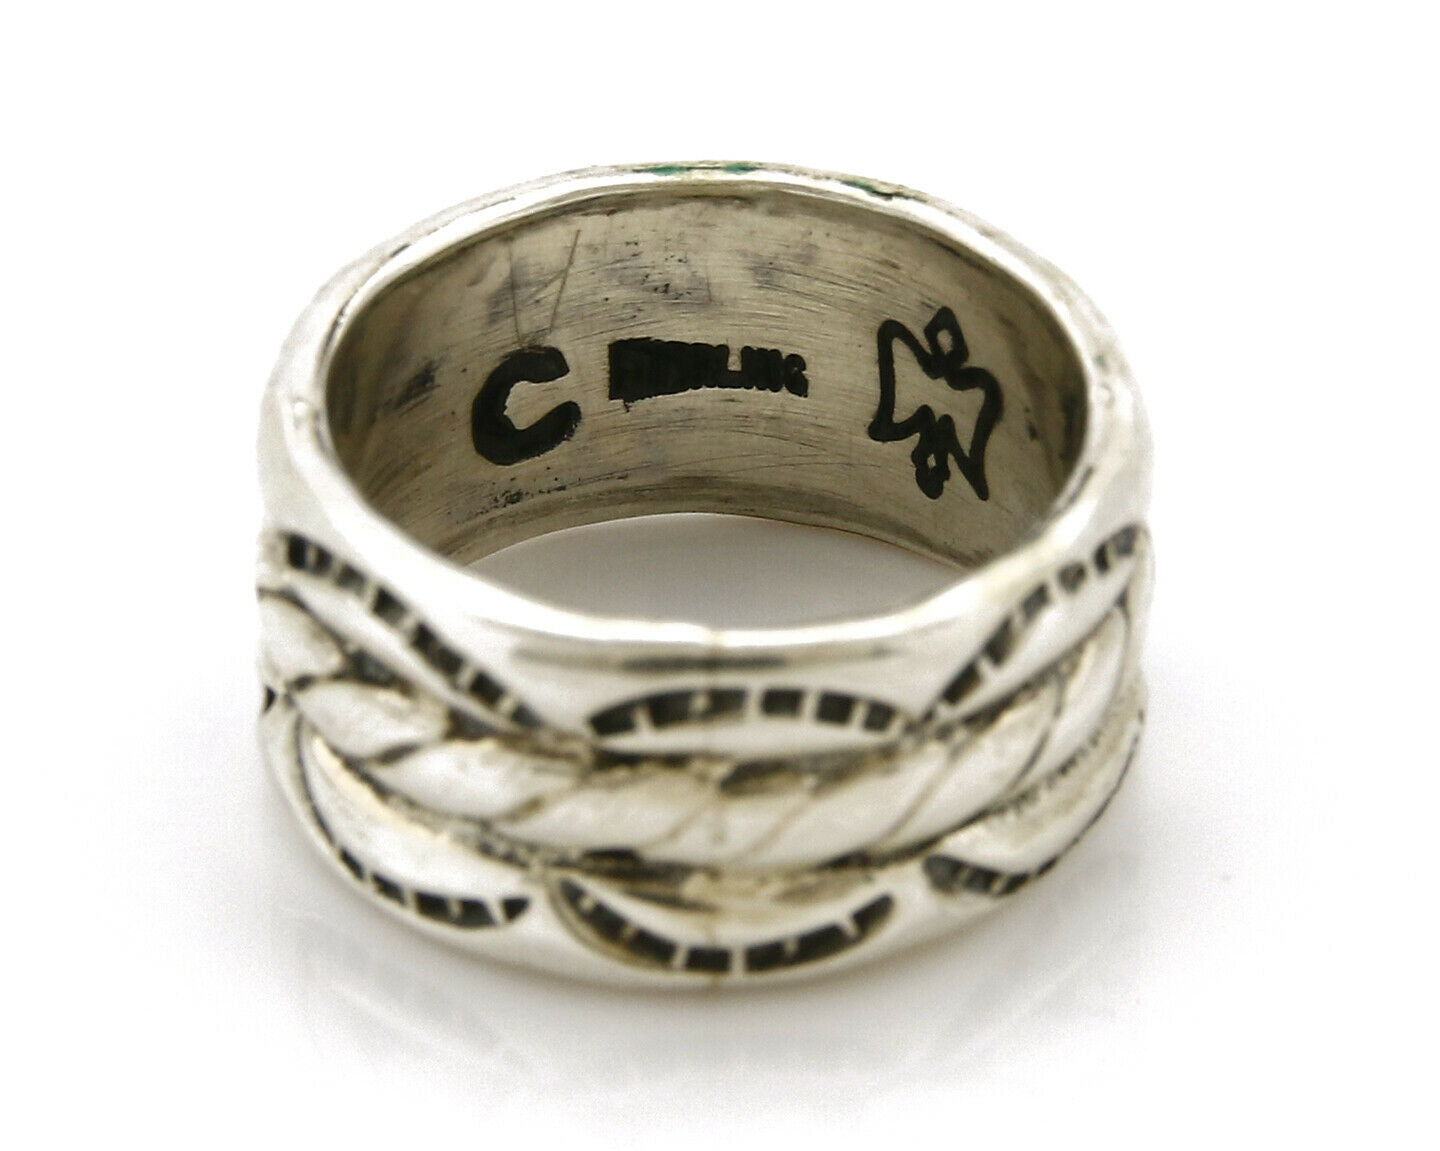 Navajo Ring .925 Silver Handmade Hand Stamped 3 Row Rope Band C.1980's Size 5.25